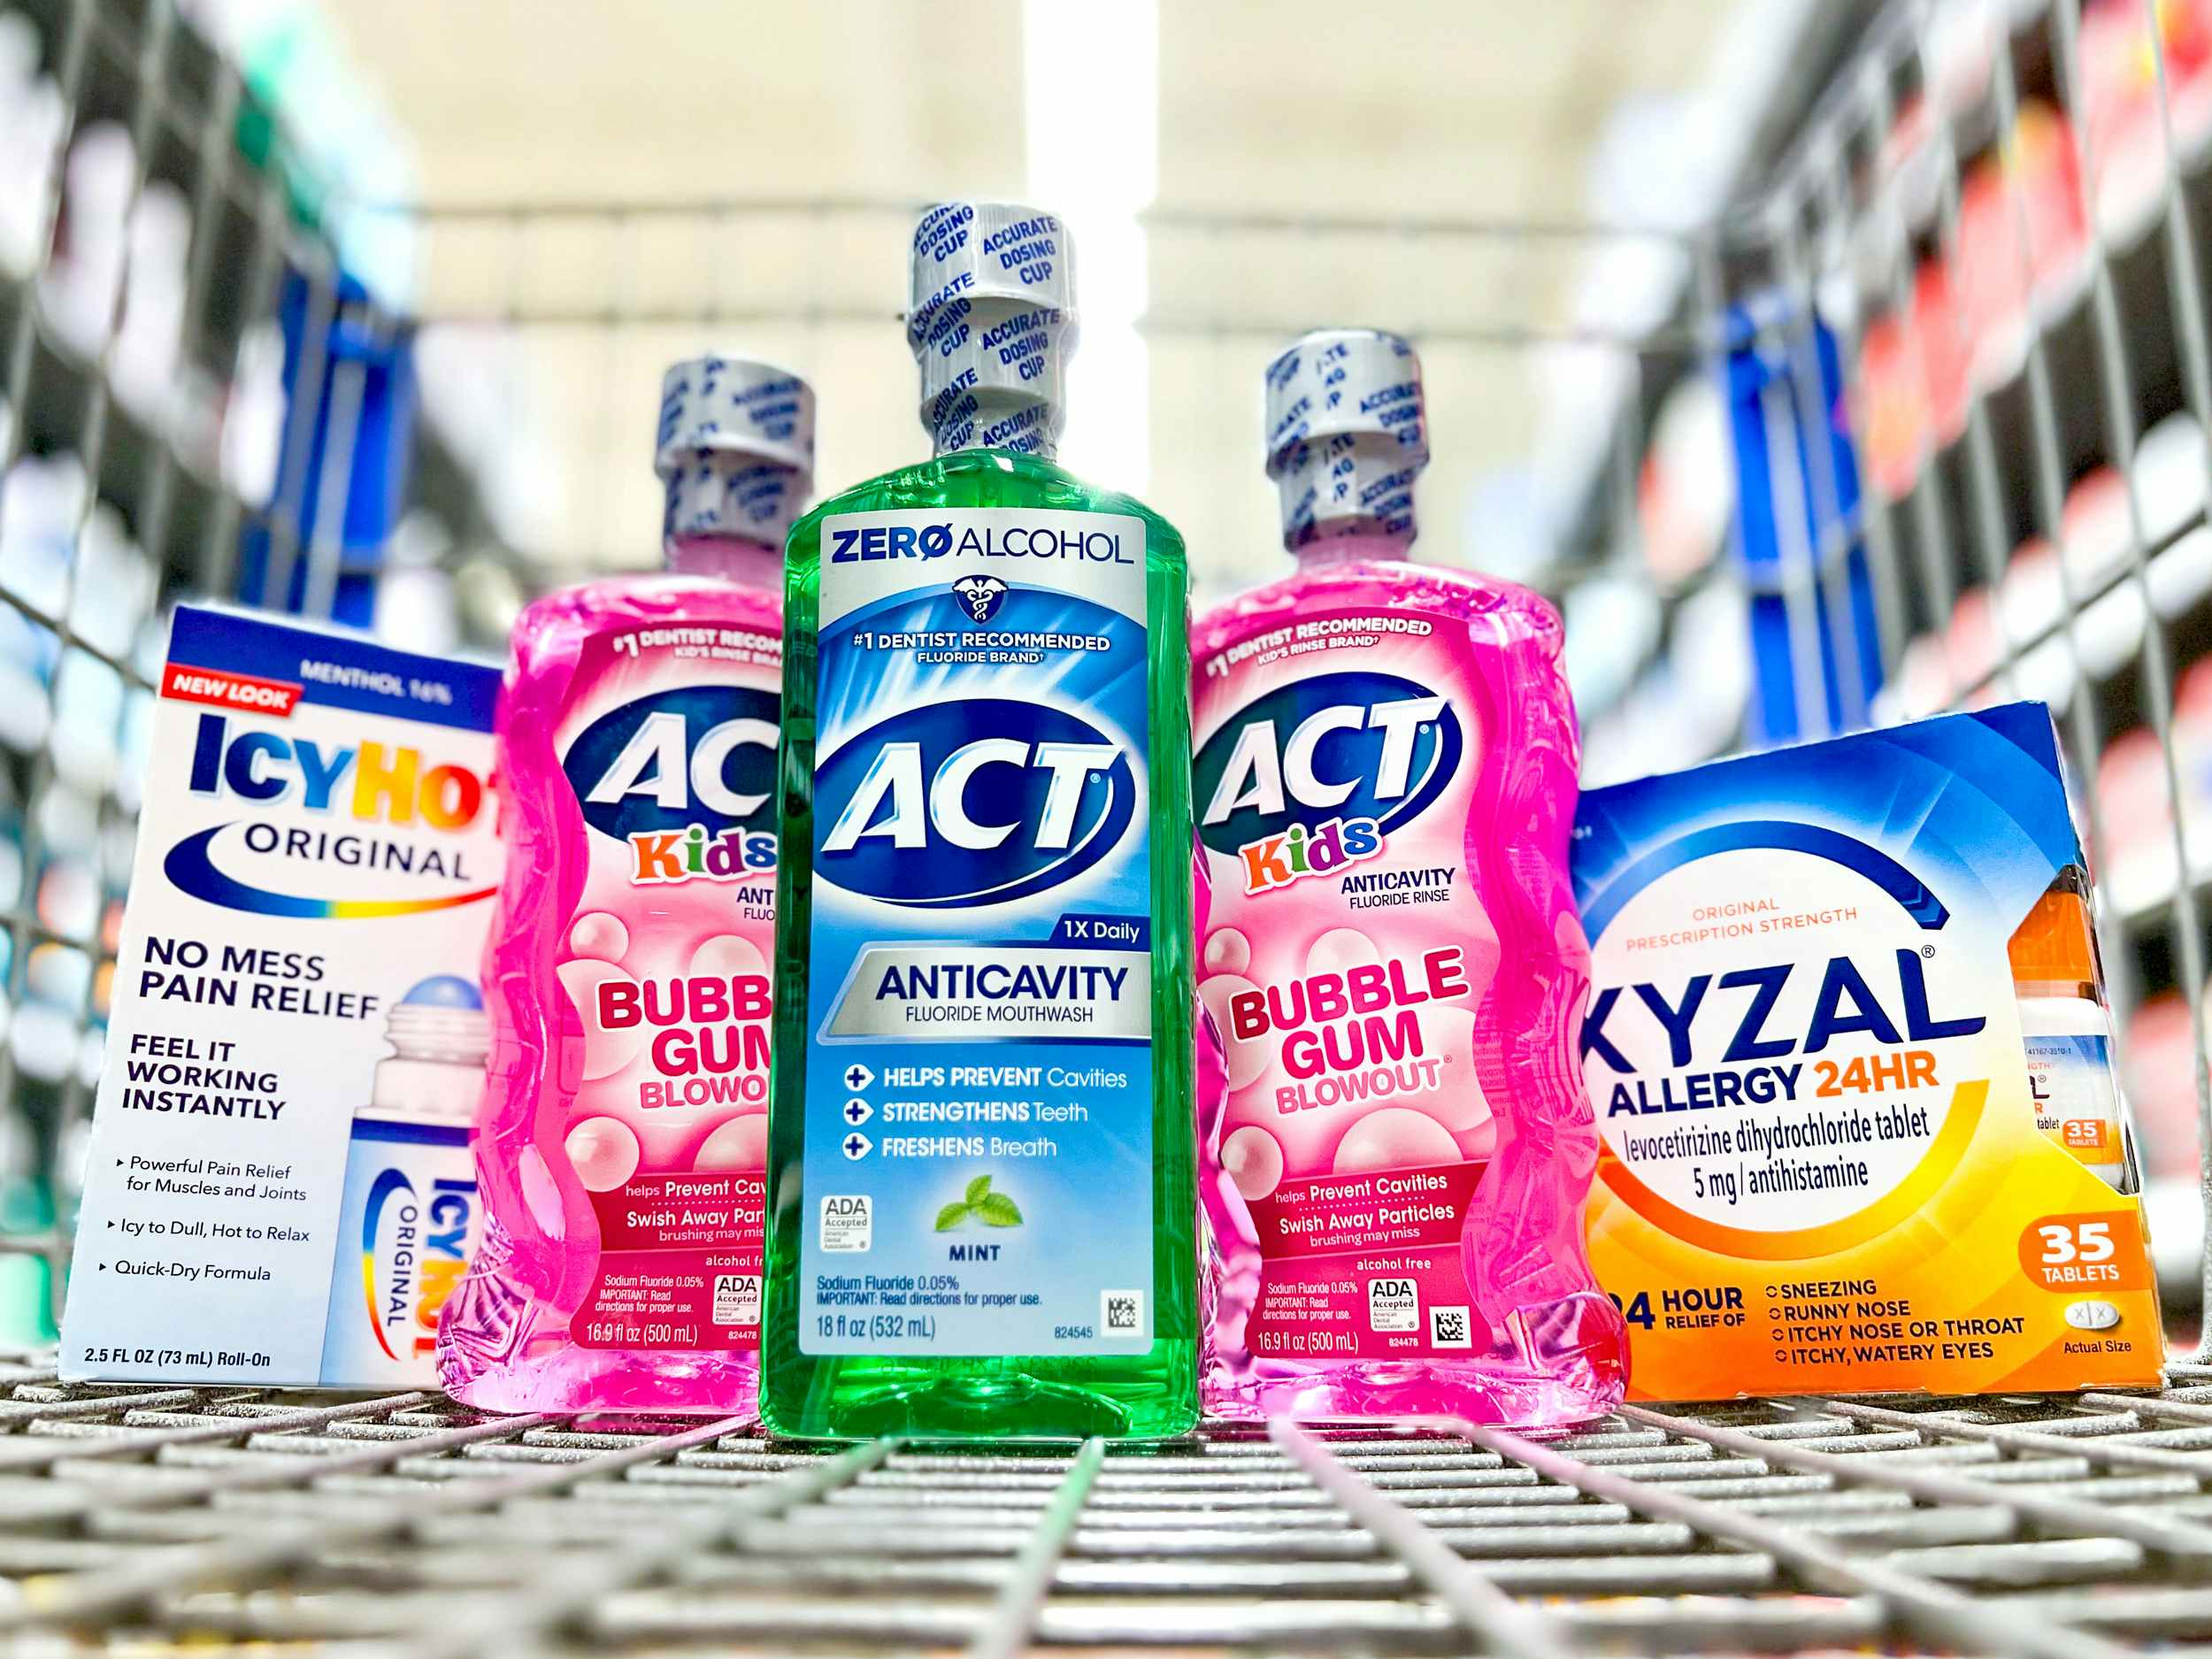 icy hot original, act kids and anticavity outhwash, and xyzal allergy in walmart shopping cart